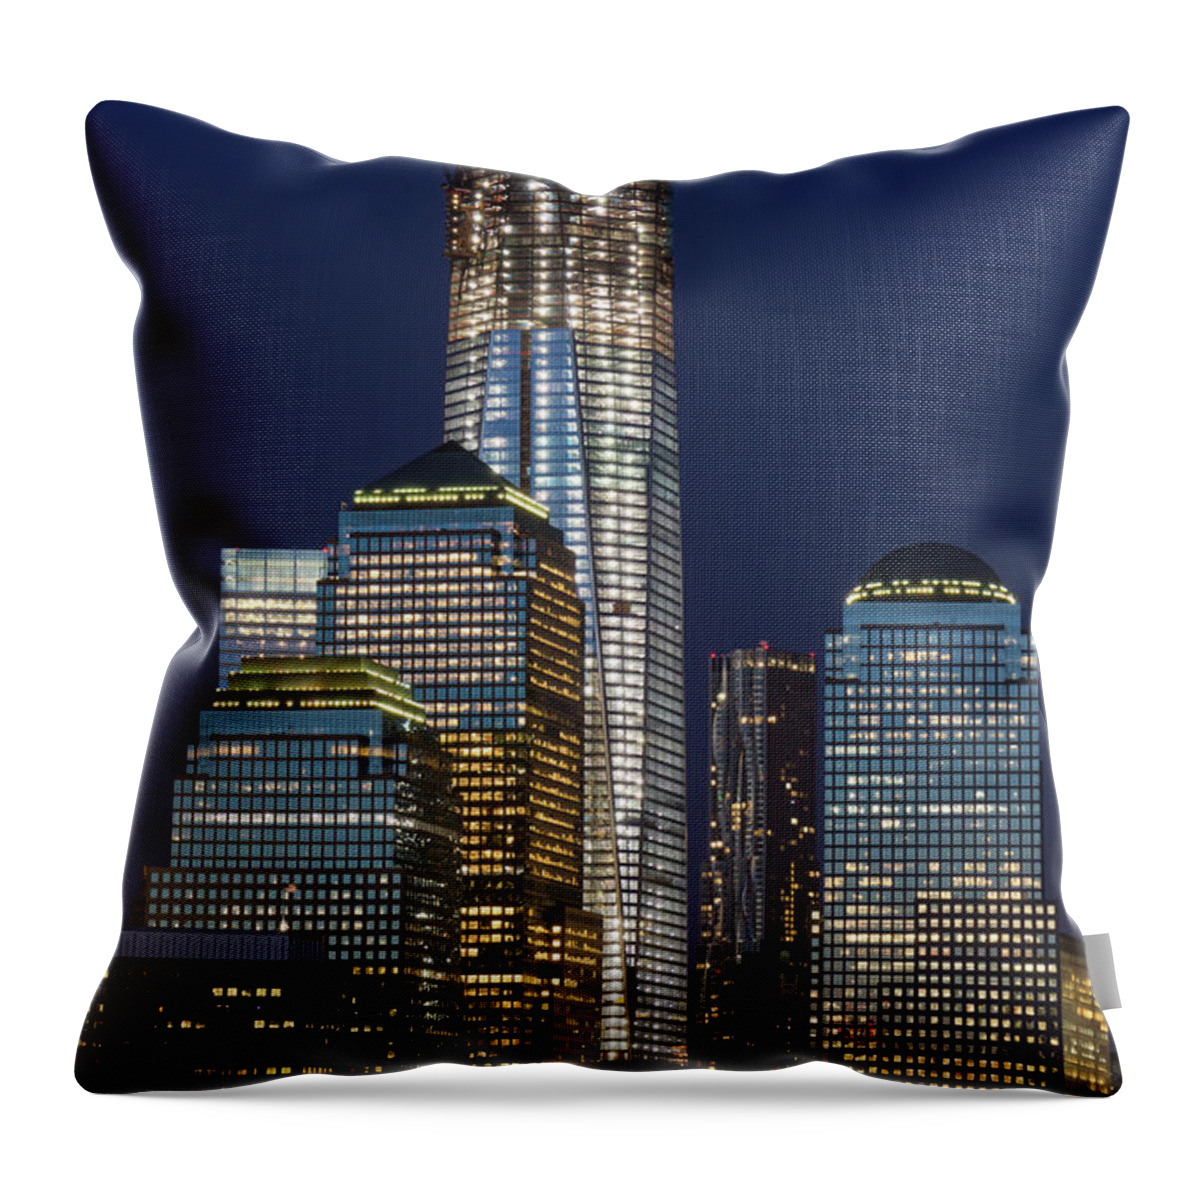 Downtown District Throw Pillow featuring the photograph Freedom Tower And New York Syline At by Siegfried Layda